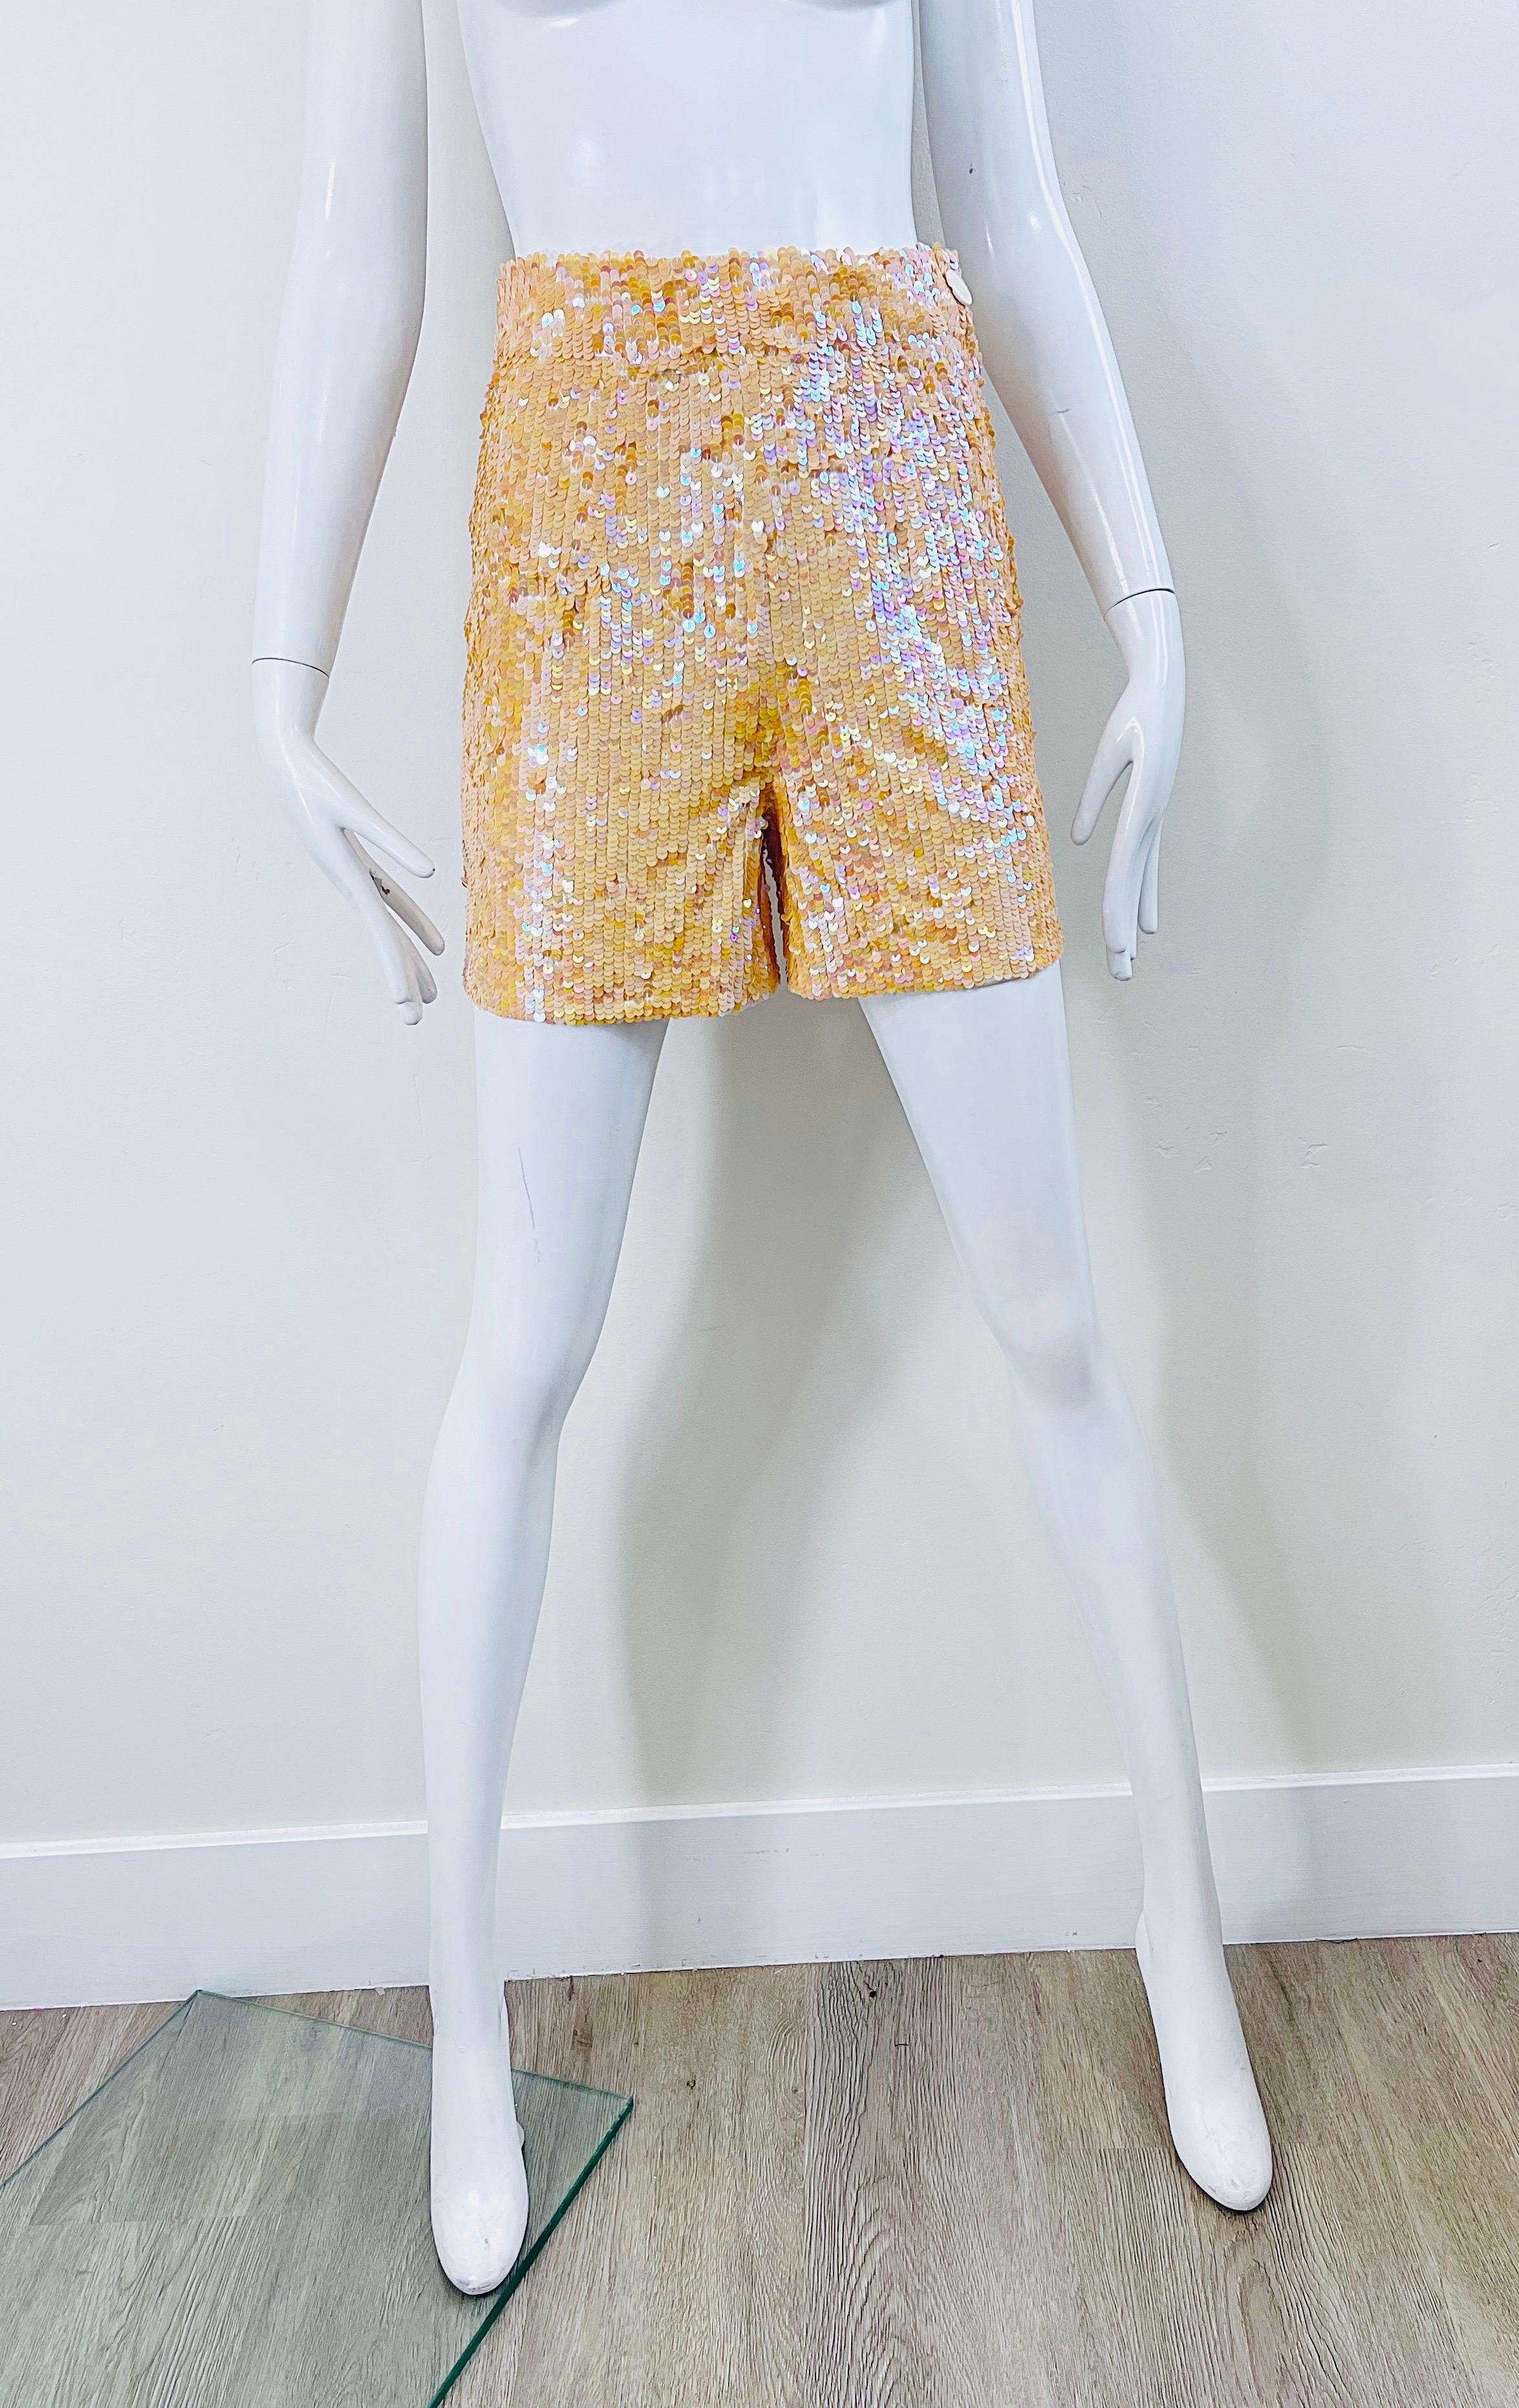 Chic OLEG CASSINI salmon / light pink color fully sequin encrusted shorts ! Hidden zipper up the side with mock button and hook-and-eye closure.
In great unworn condition
Approximately Size Small
Measurements:
26 inch waist
38 inch hips
